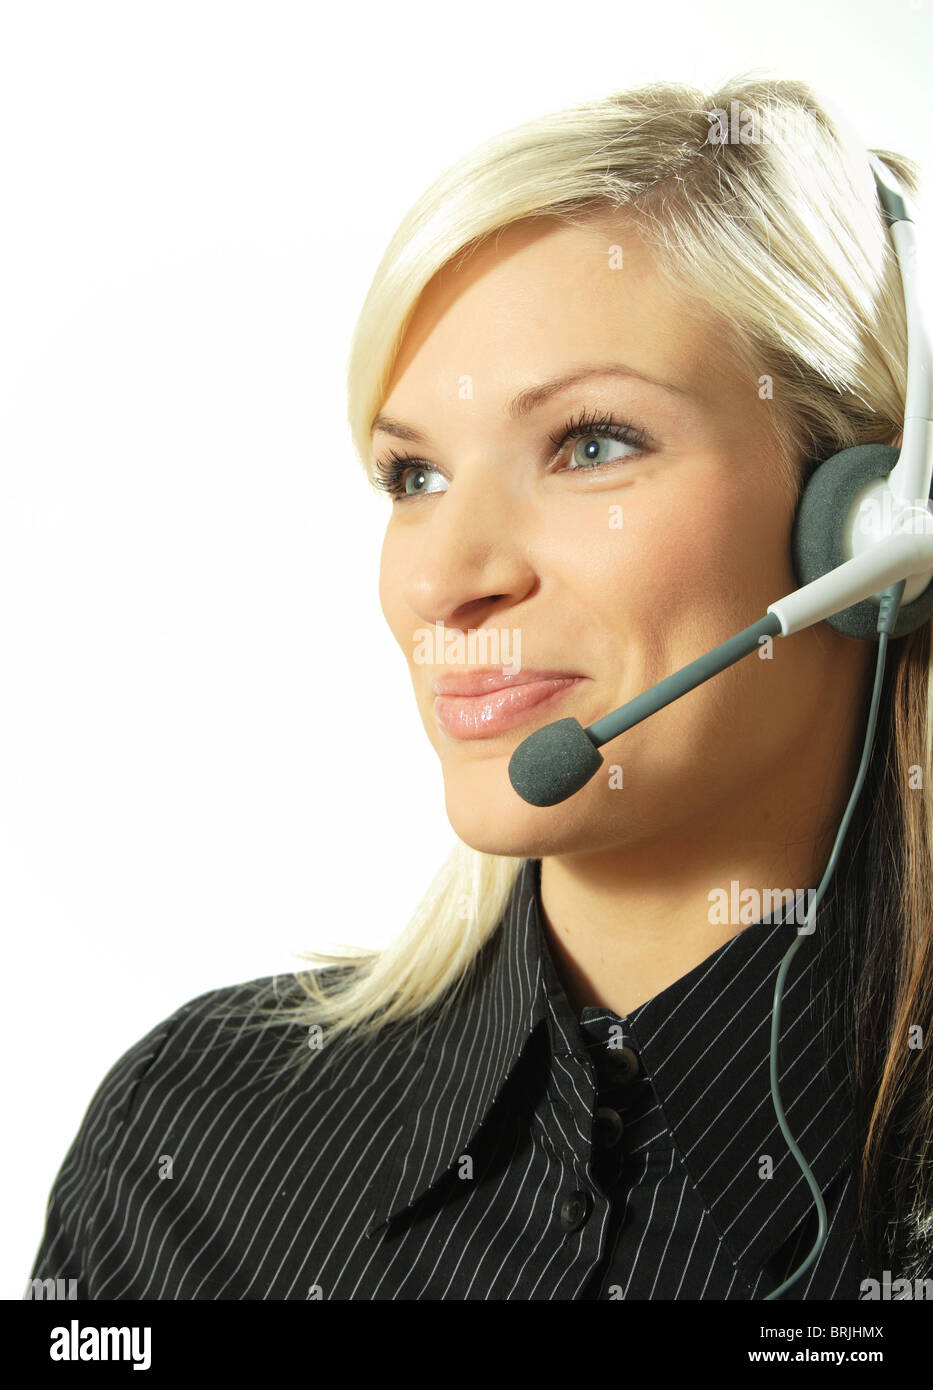 Pleasant Girl at Call Center Stock Photo